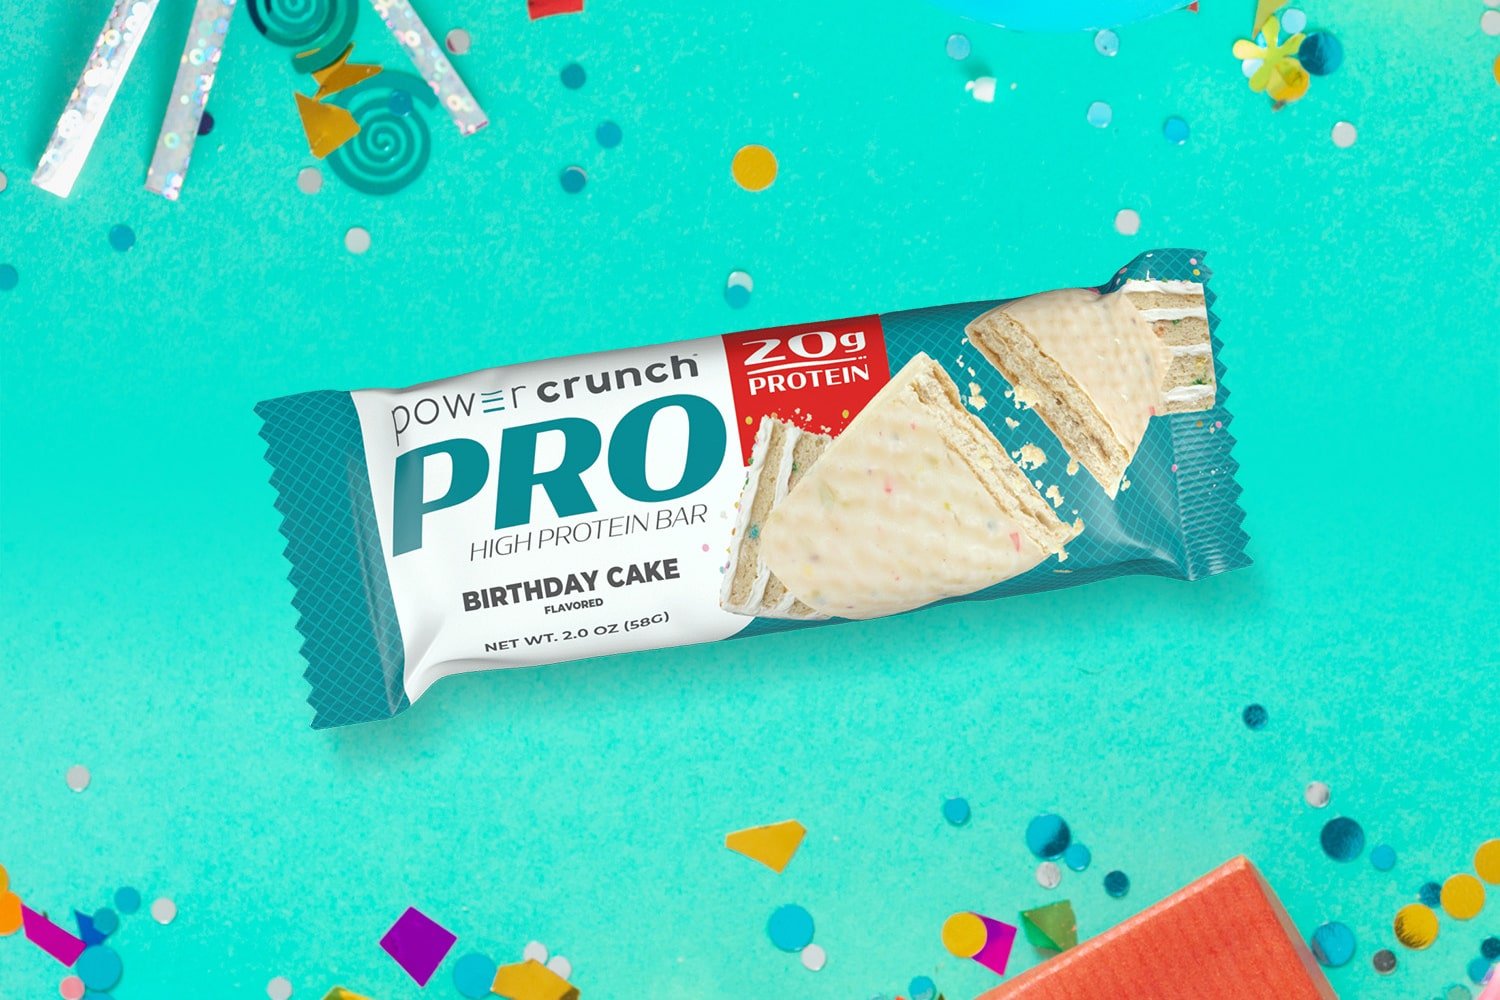 Creamy and crunchy wafer protein bars in PRO Birthday Cake